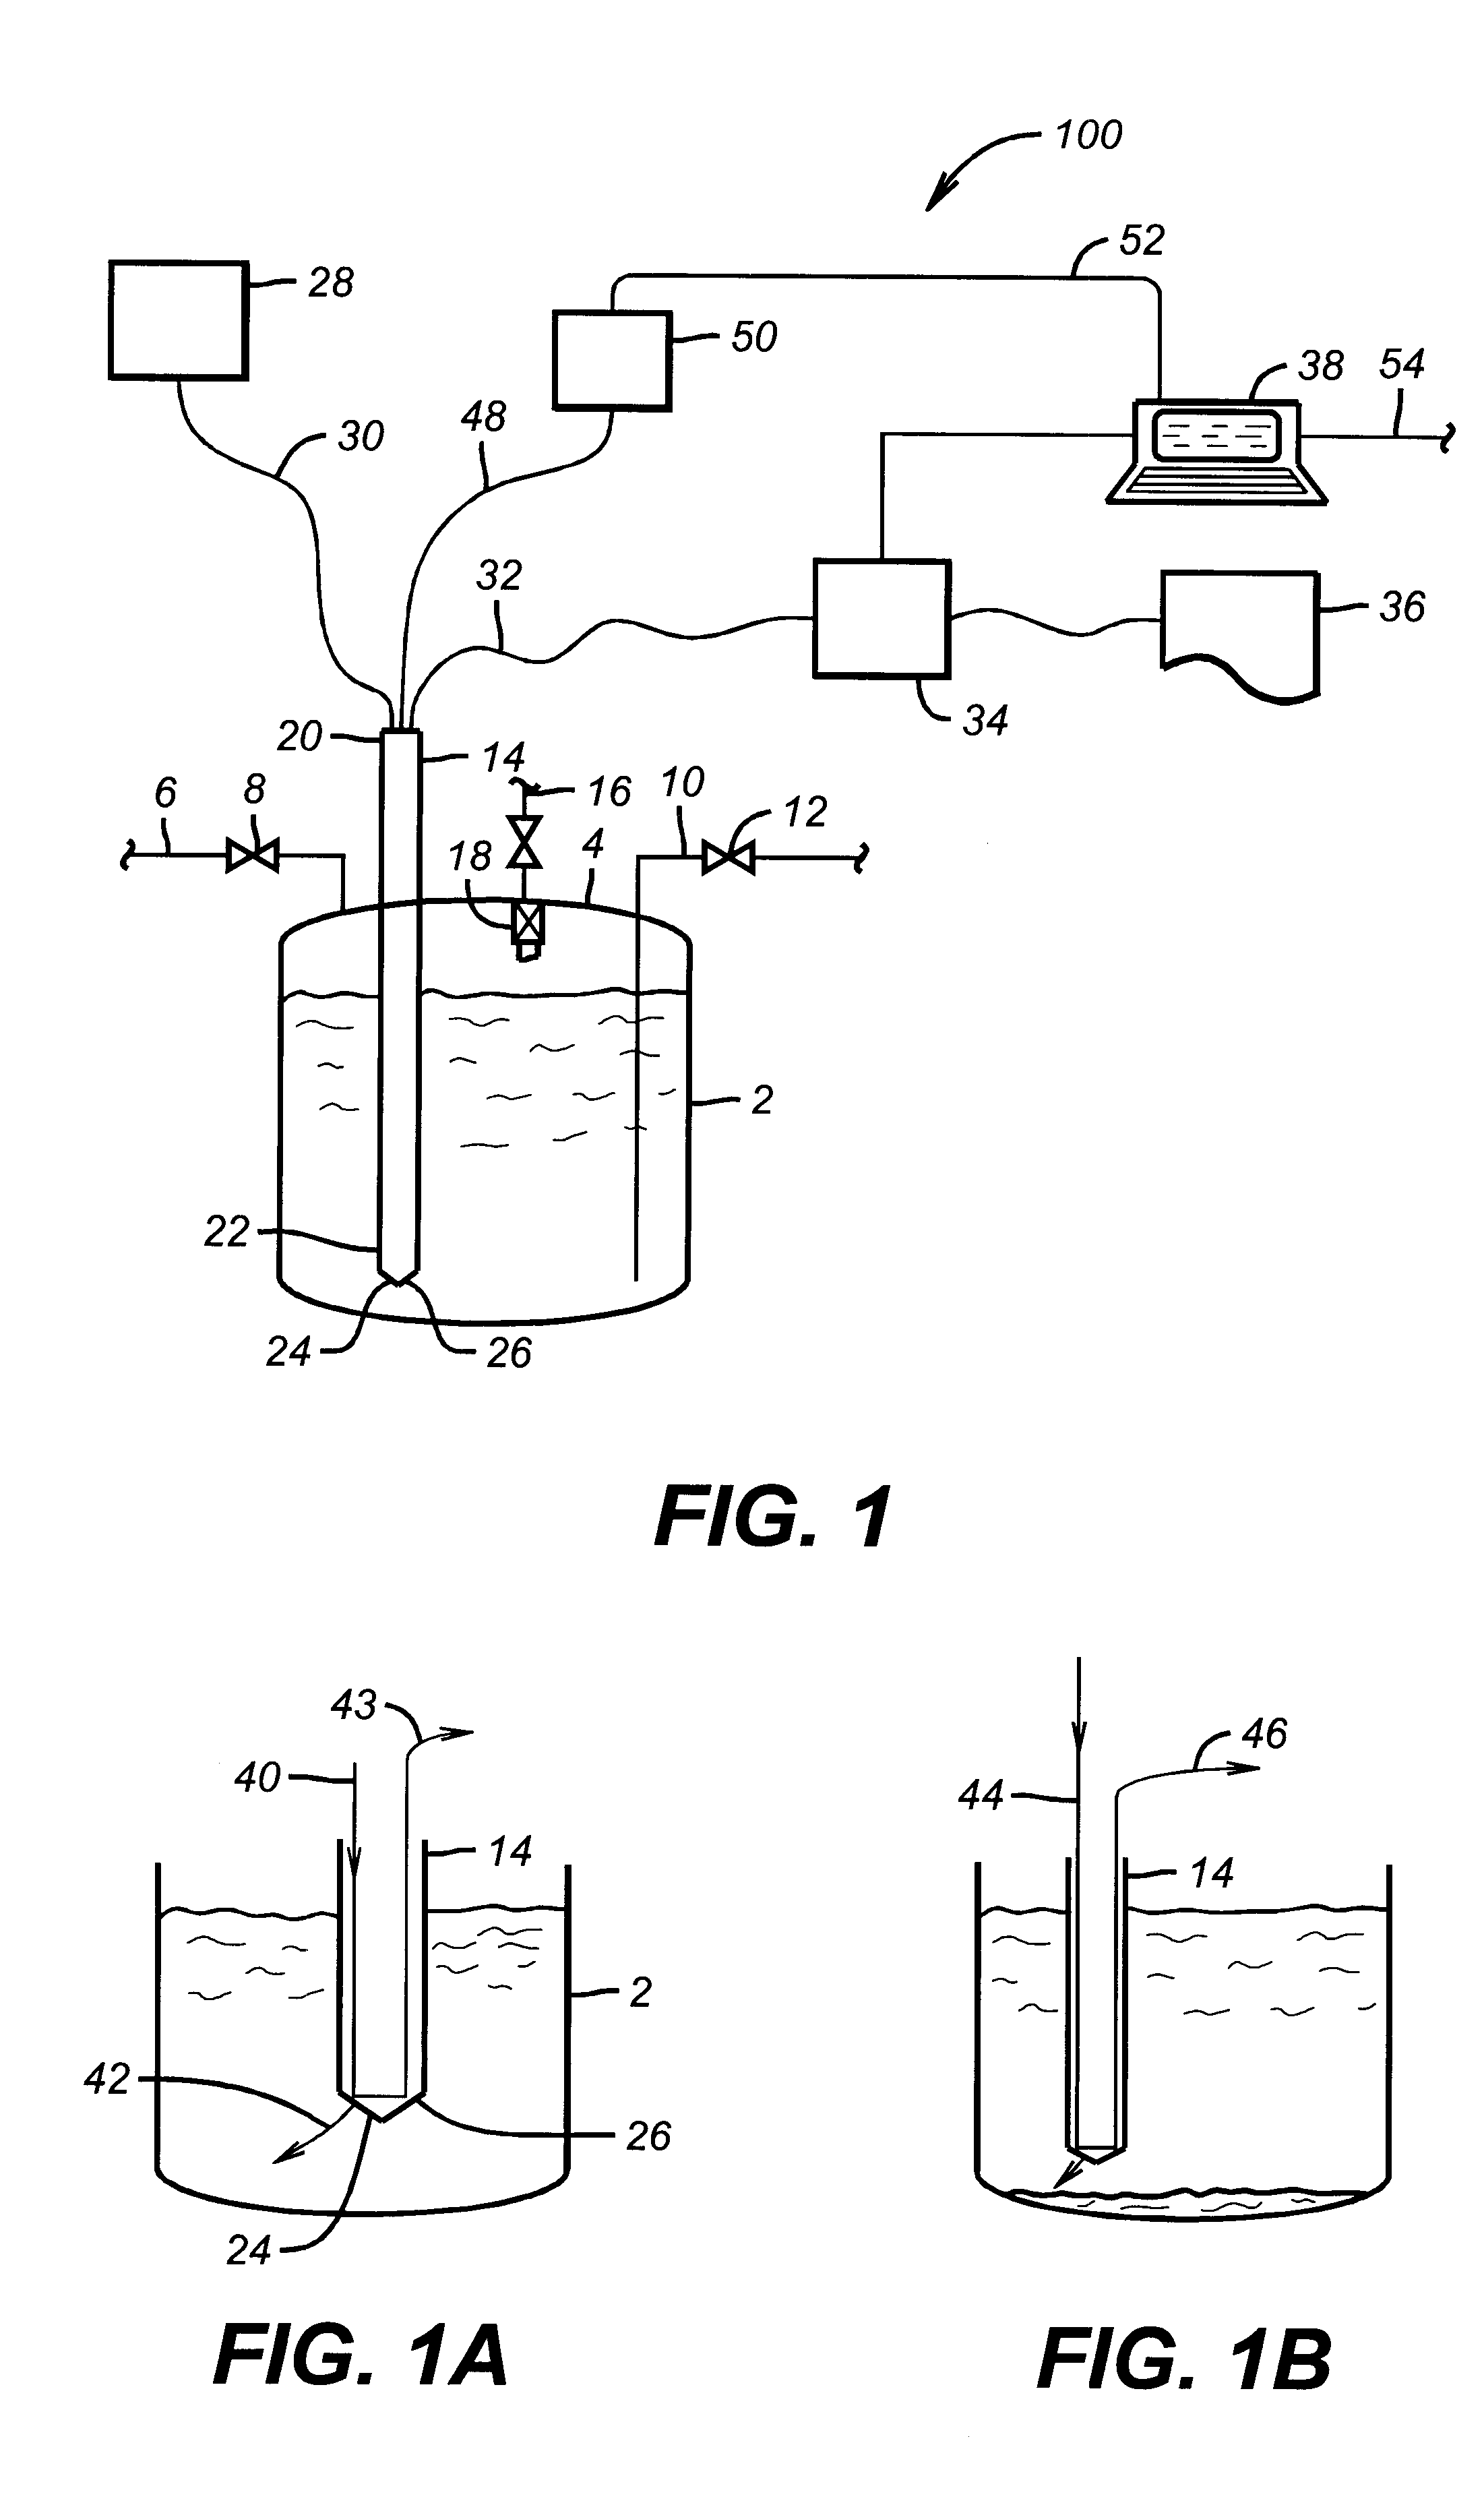 Optical monitoring processes and apparatus for combined liquid level sensing and quality control